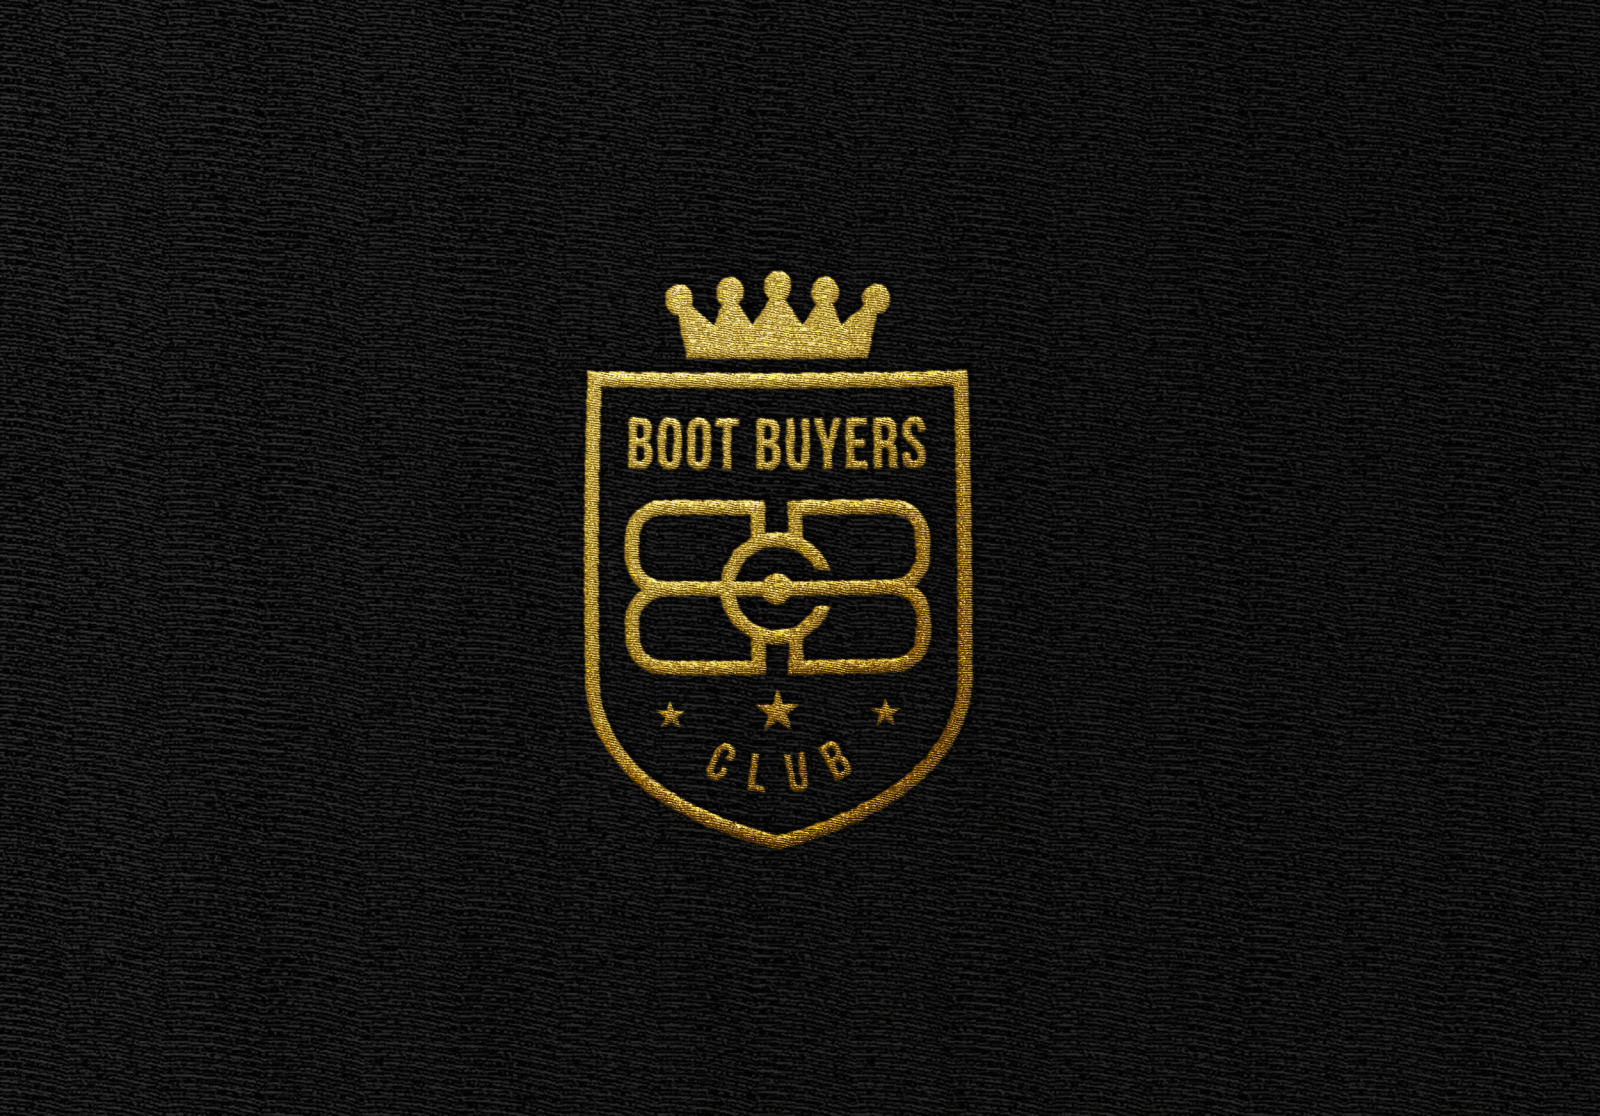 Brand Identity Design for Boot Buyers Club